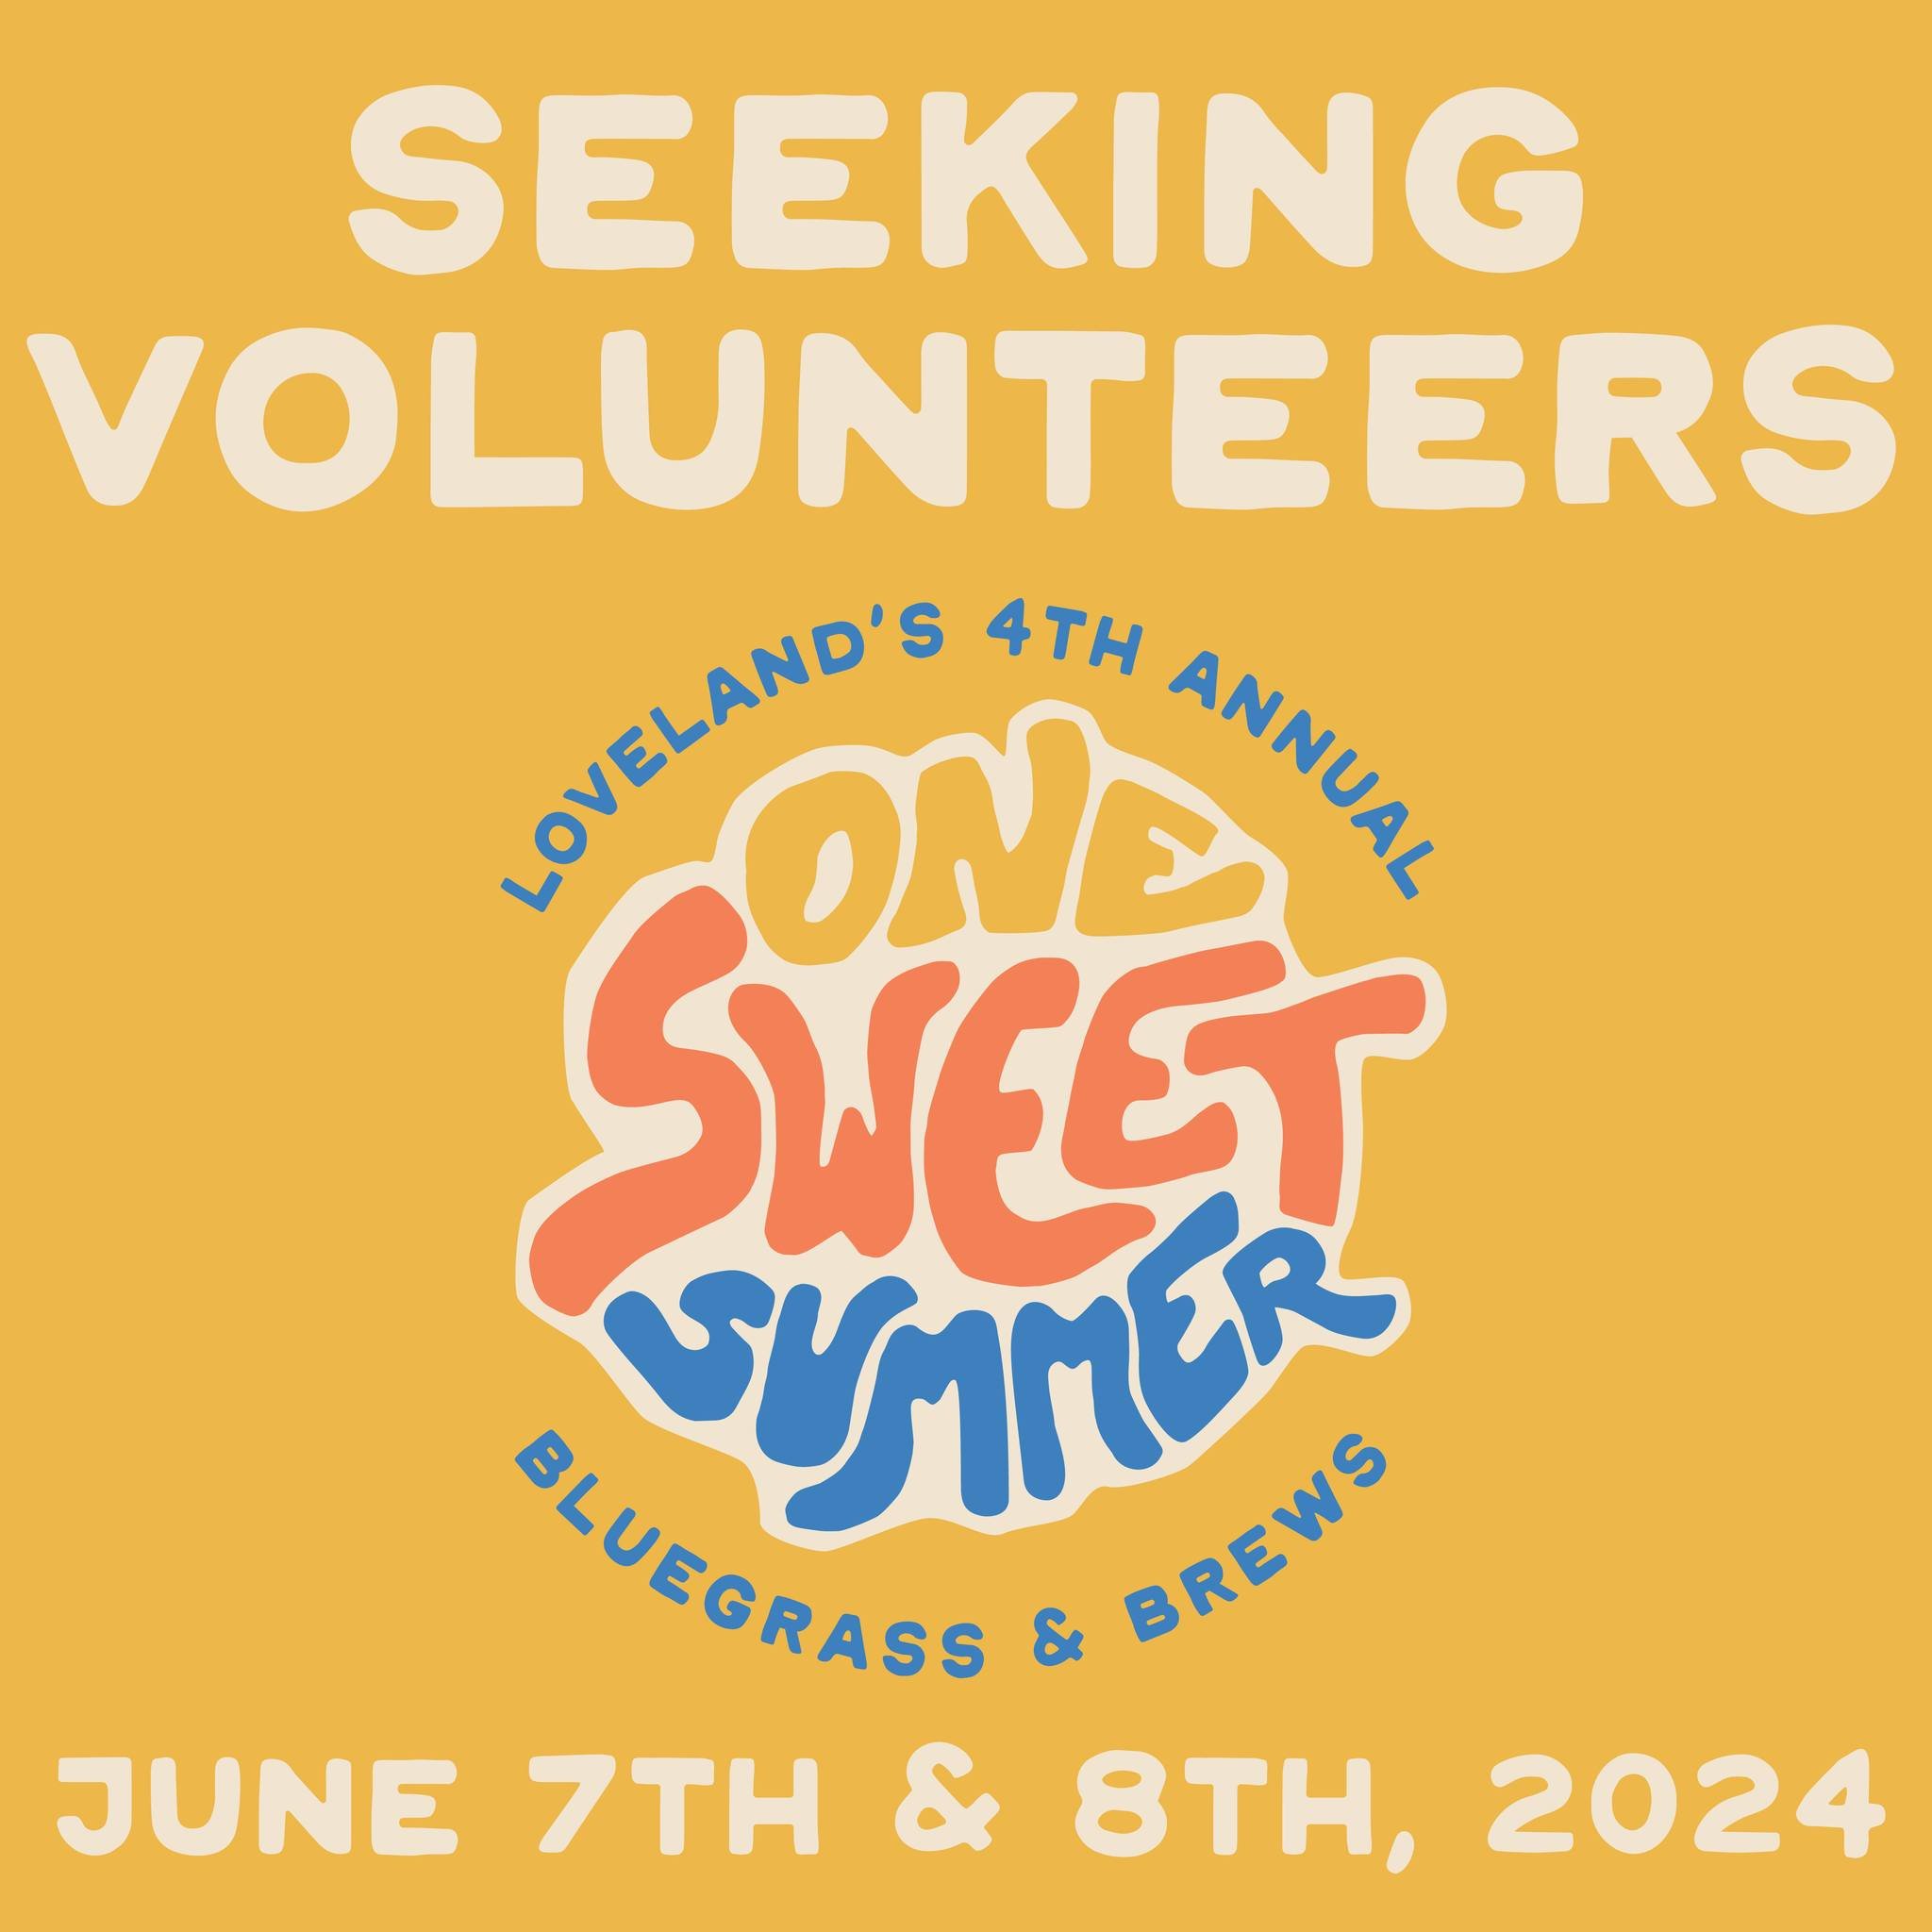 We are looking for a few volunteers for our upcoming Bluegrass and Brews event on June 7th &amp; 8th! There are currently multiple shifts available 🪕🍻
More info about what shifts need filled / sign up information can be found at the link in our bio